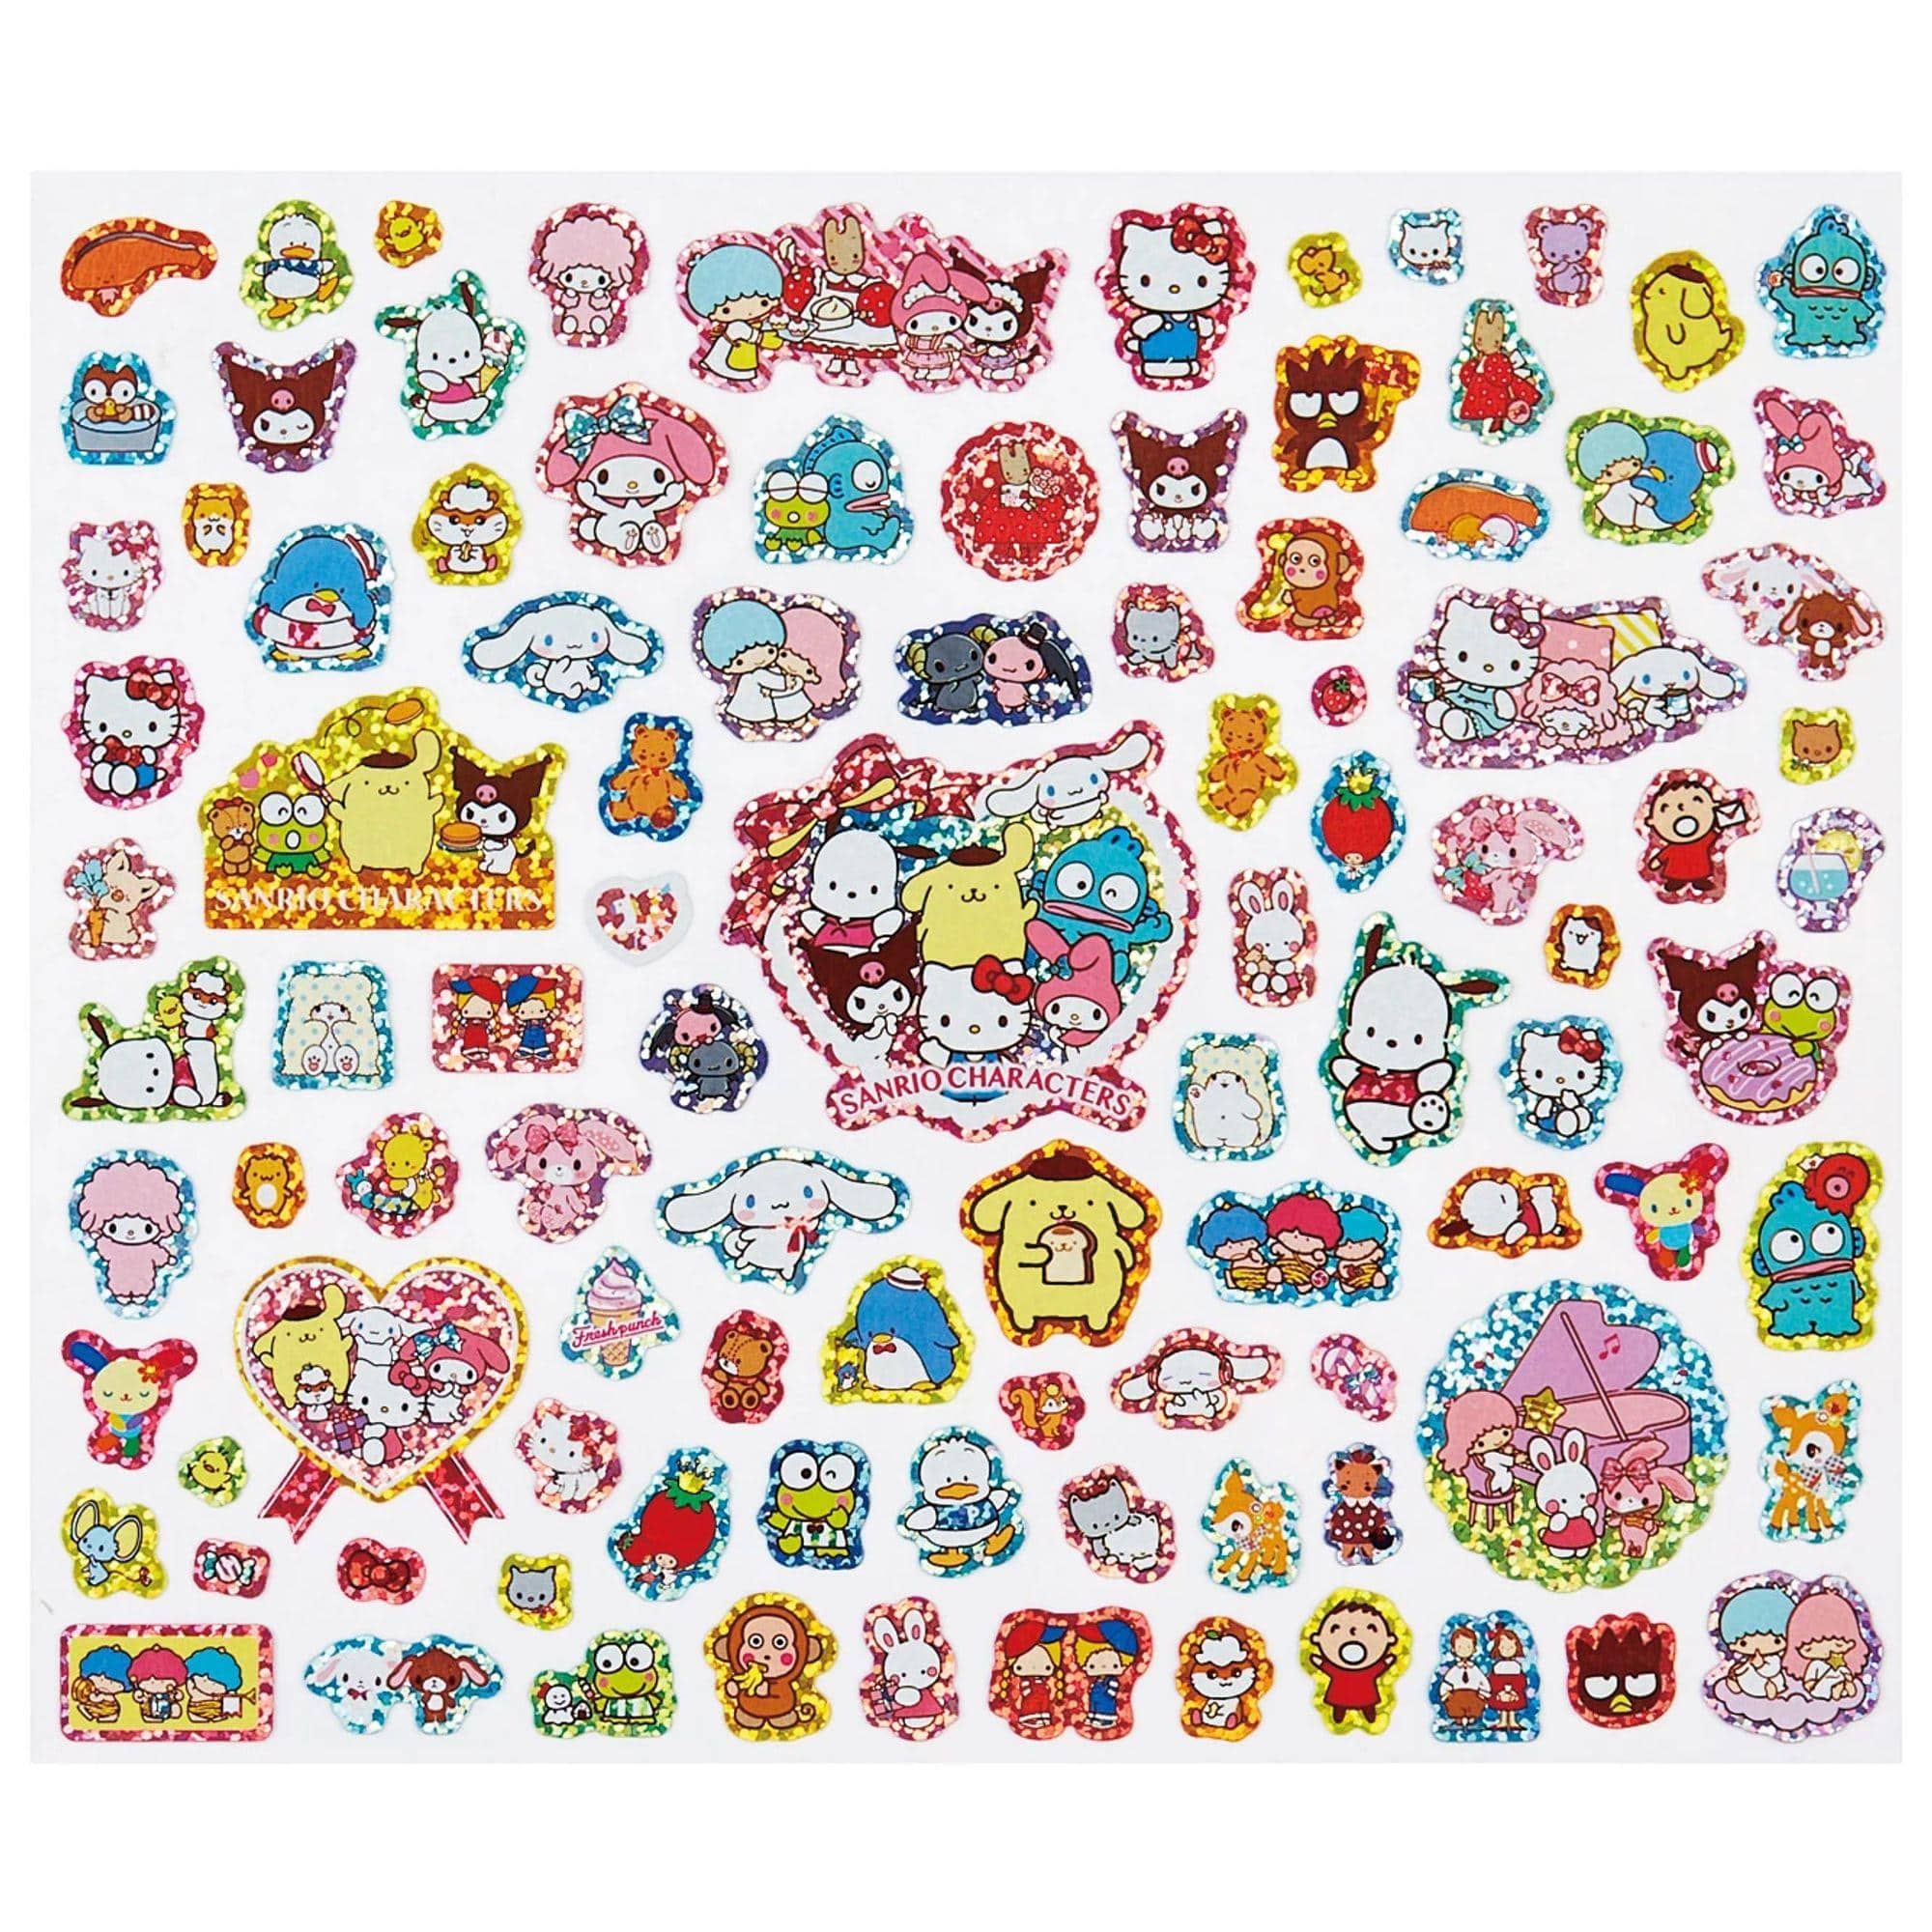 Enesco Sanrio Original Sparkly Stickers Extra Large Sheets Character Mix Kawaii Gifts